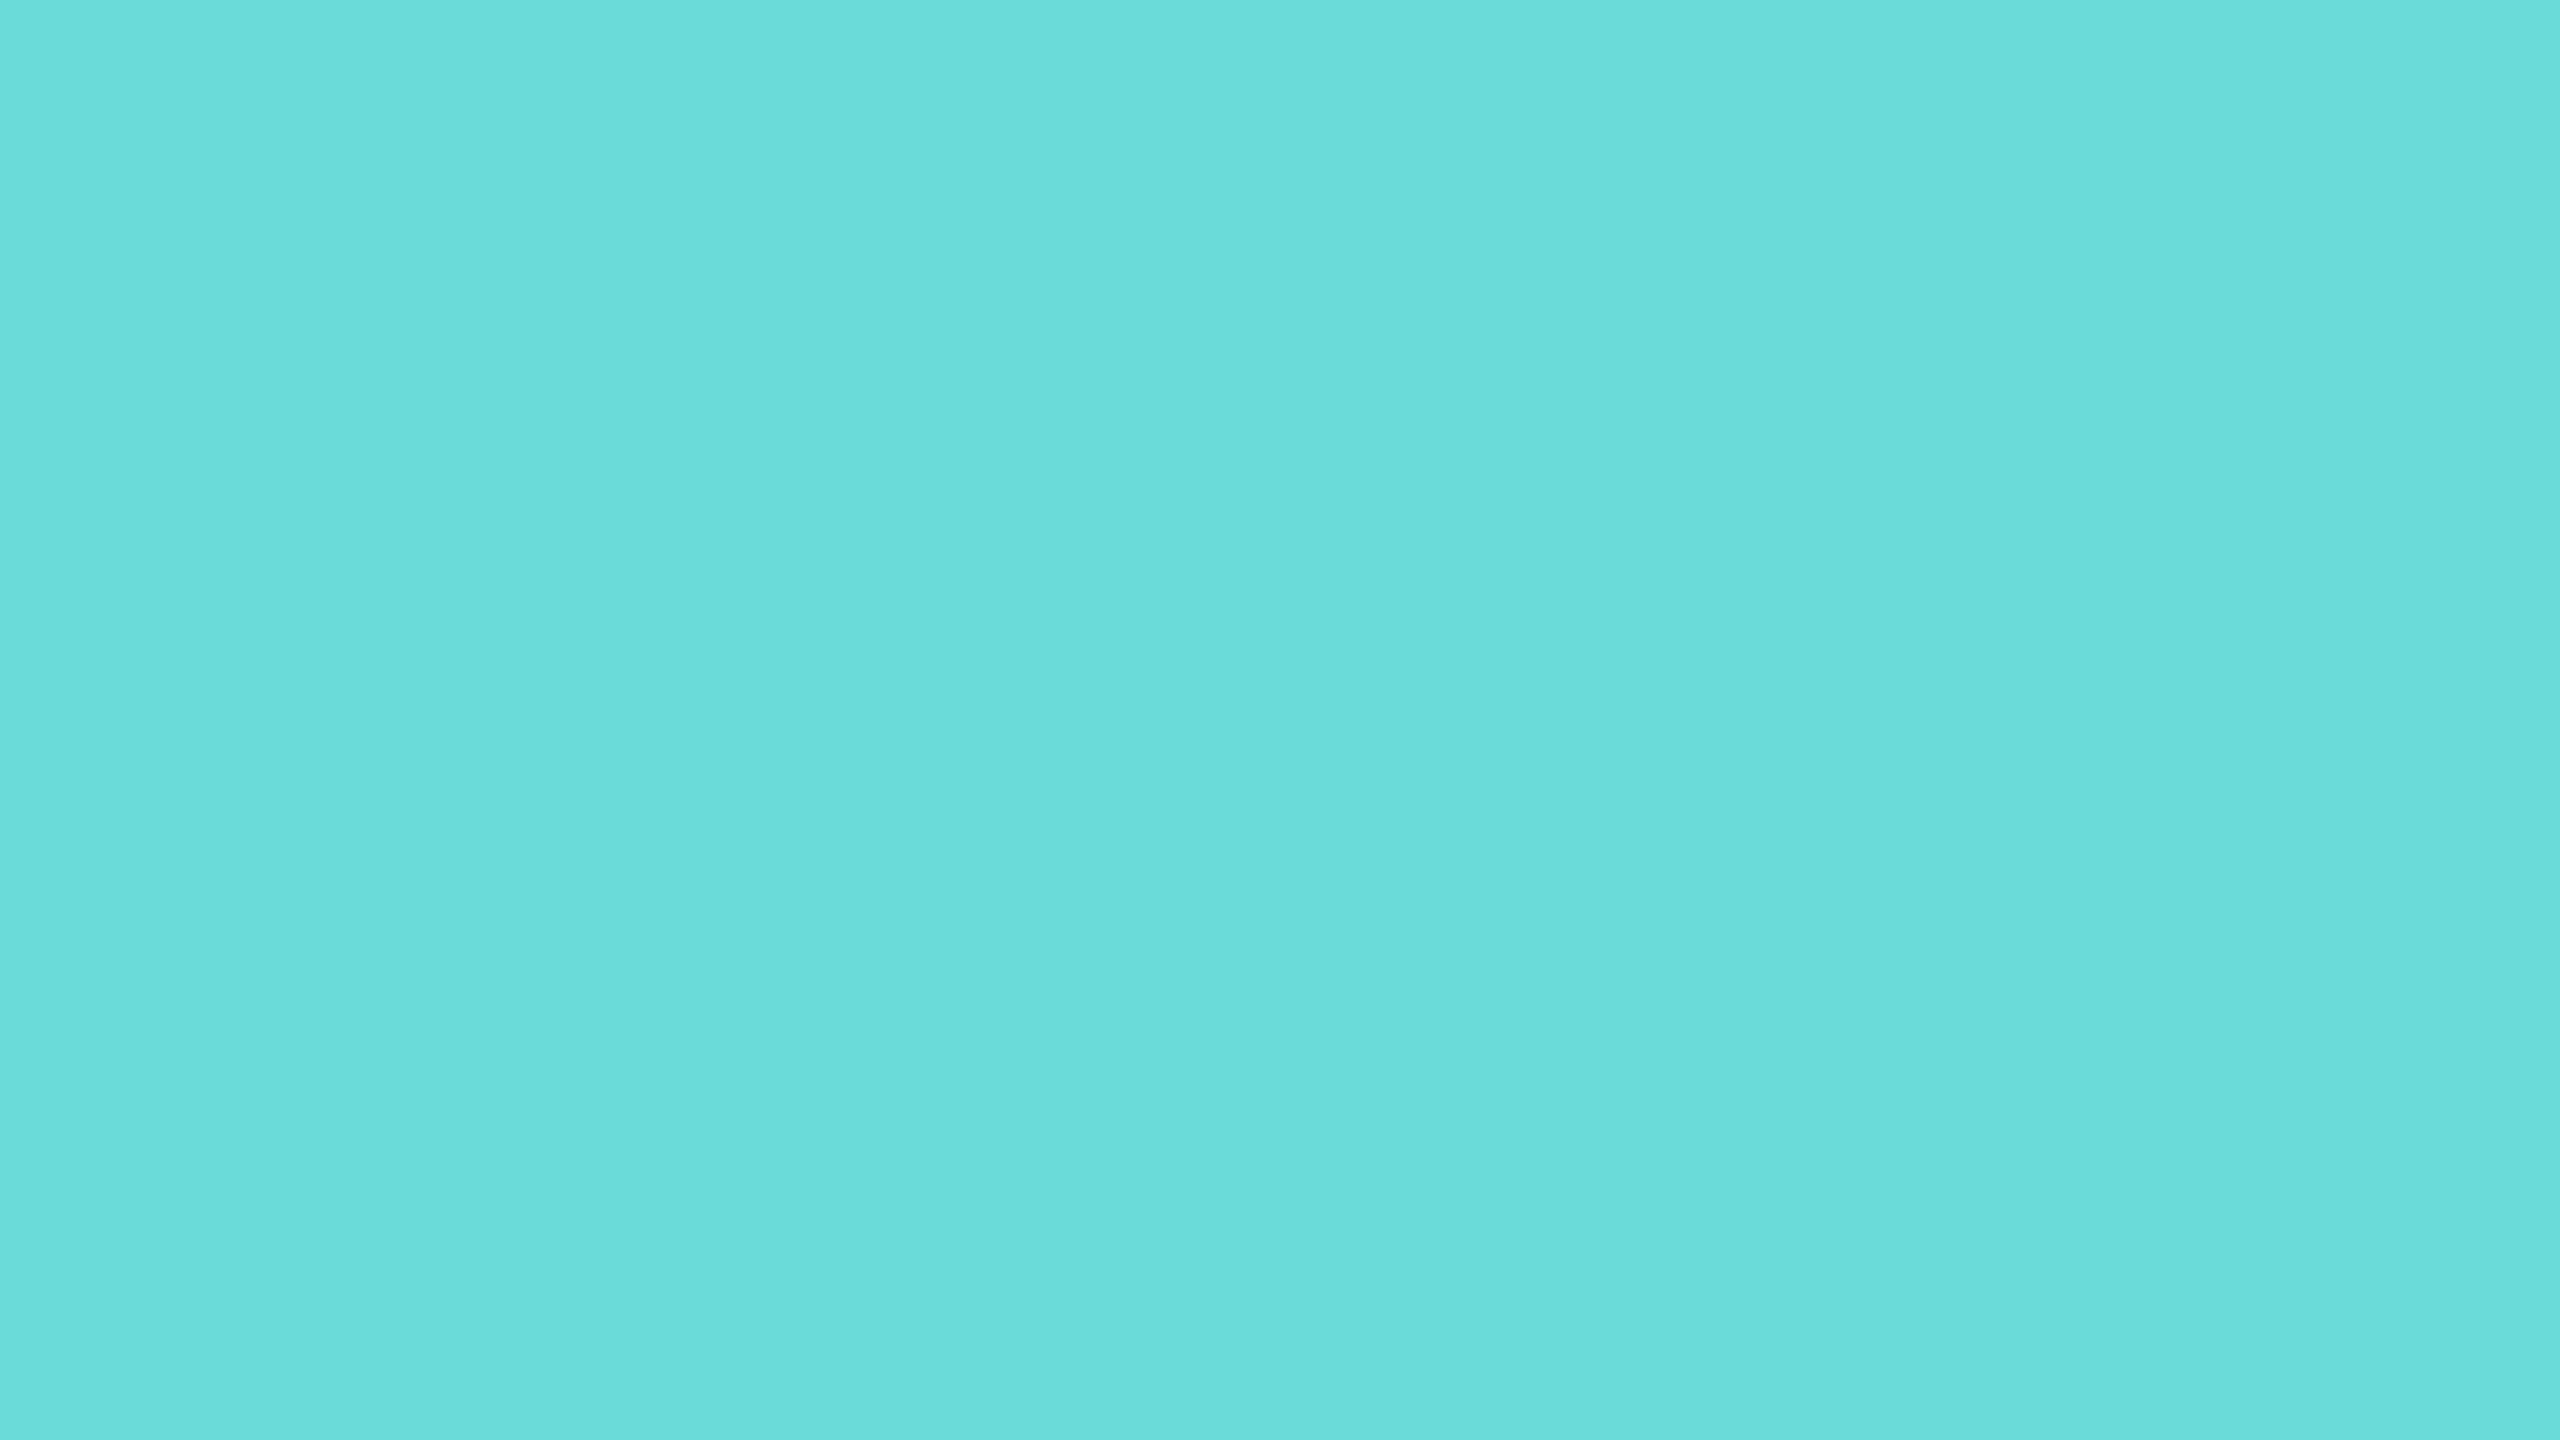 This Tiffany Blue Desktop Wallpaper Is Easy Just Save The